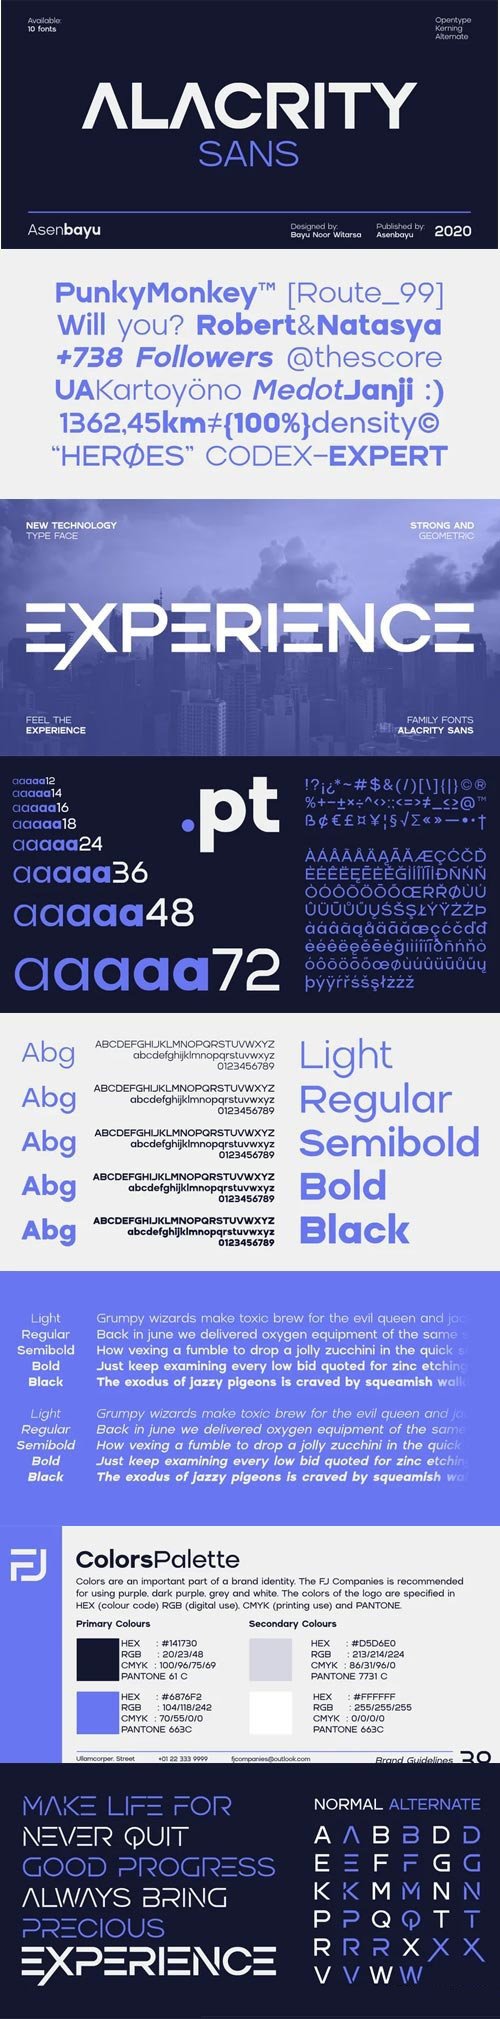 Alacrity Sans Serif Font Family [10-Weights]